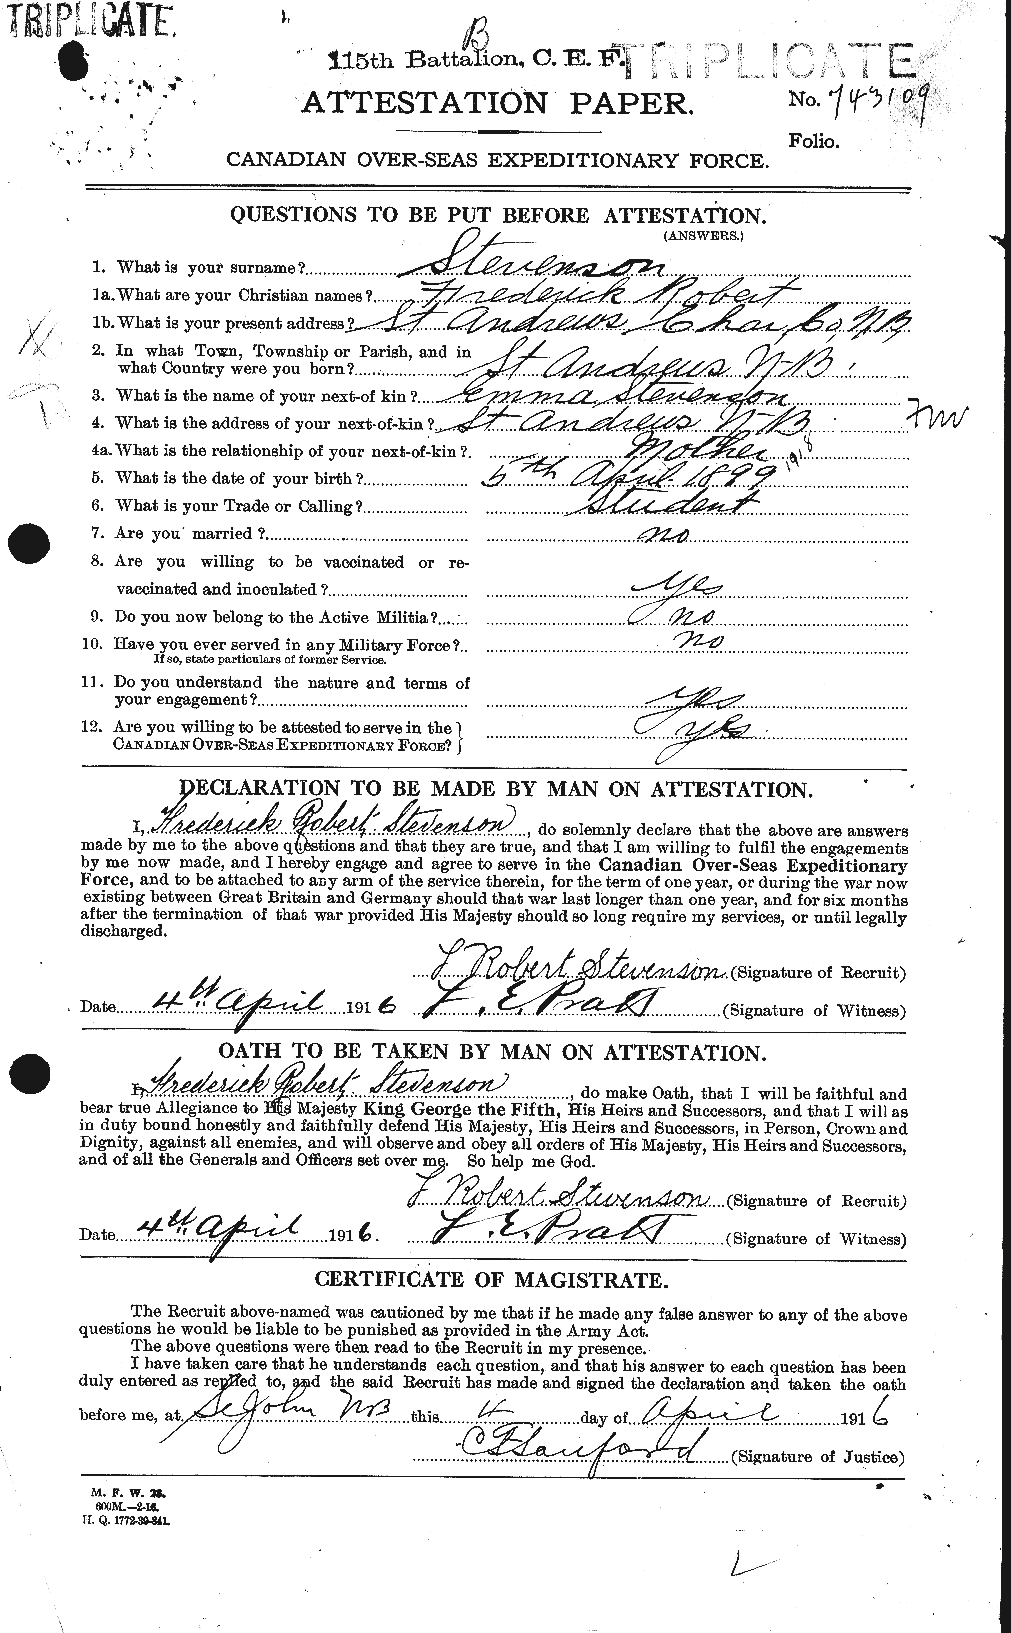 Personnel Records of the First World War - CEF 119097a